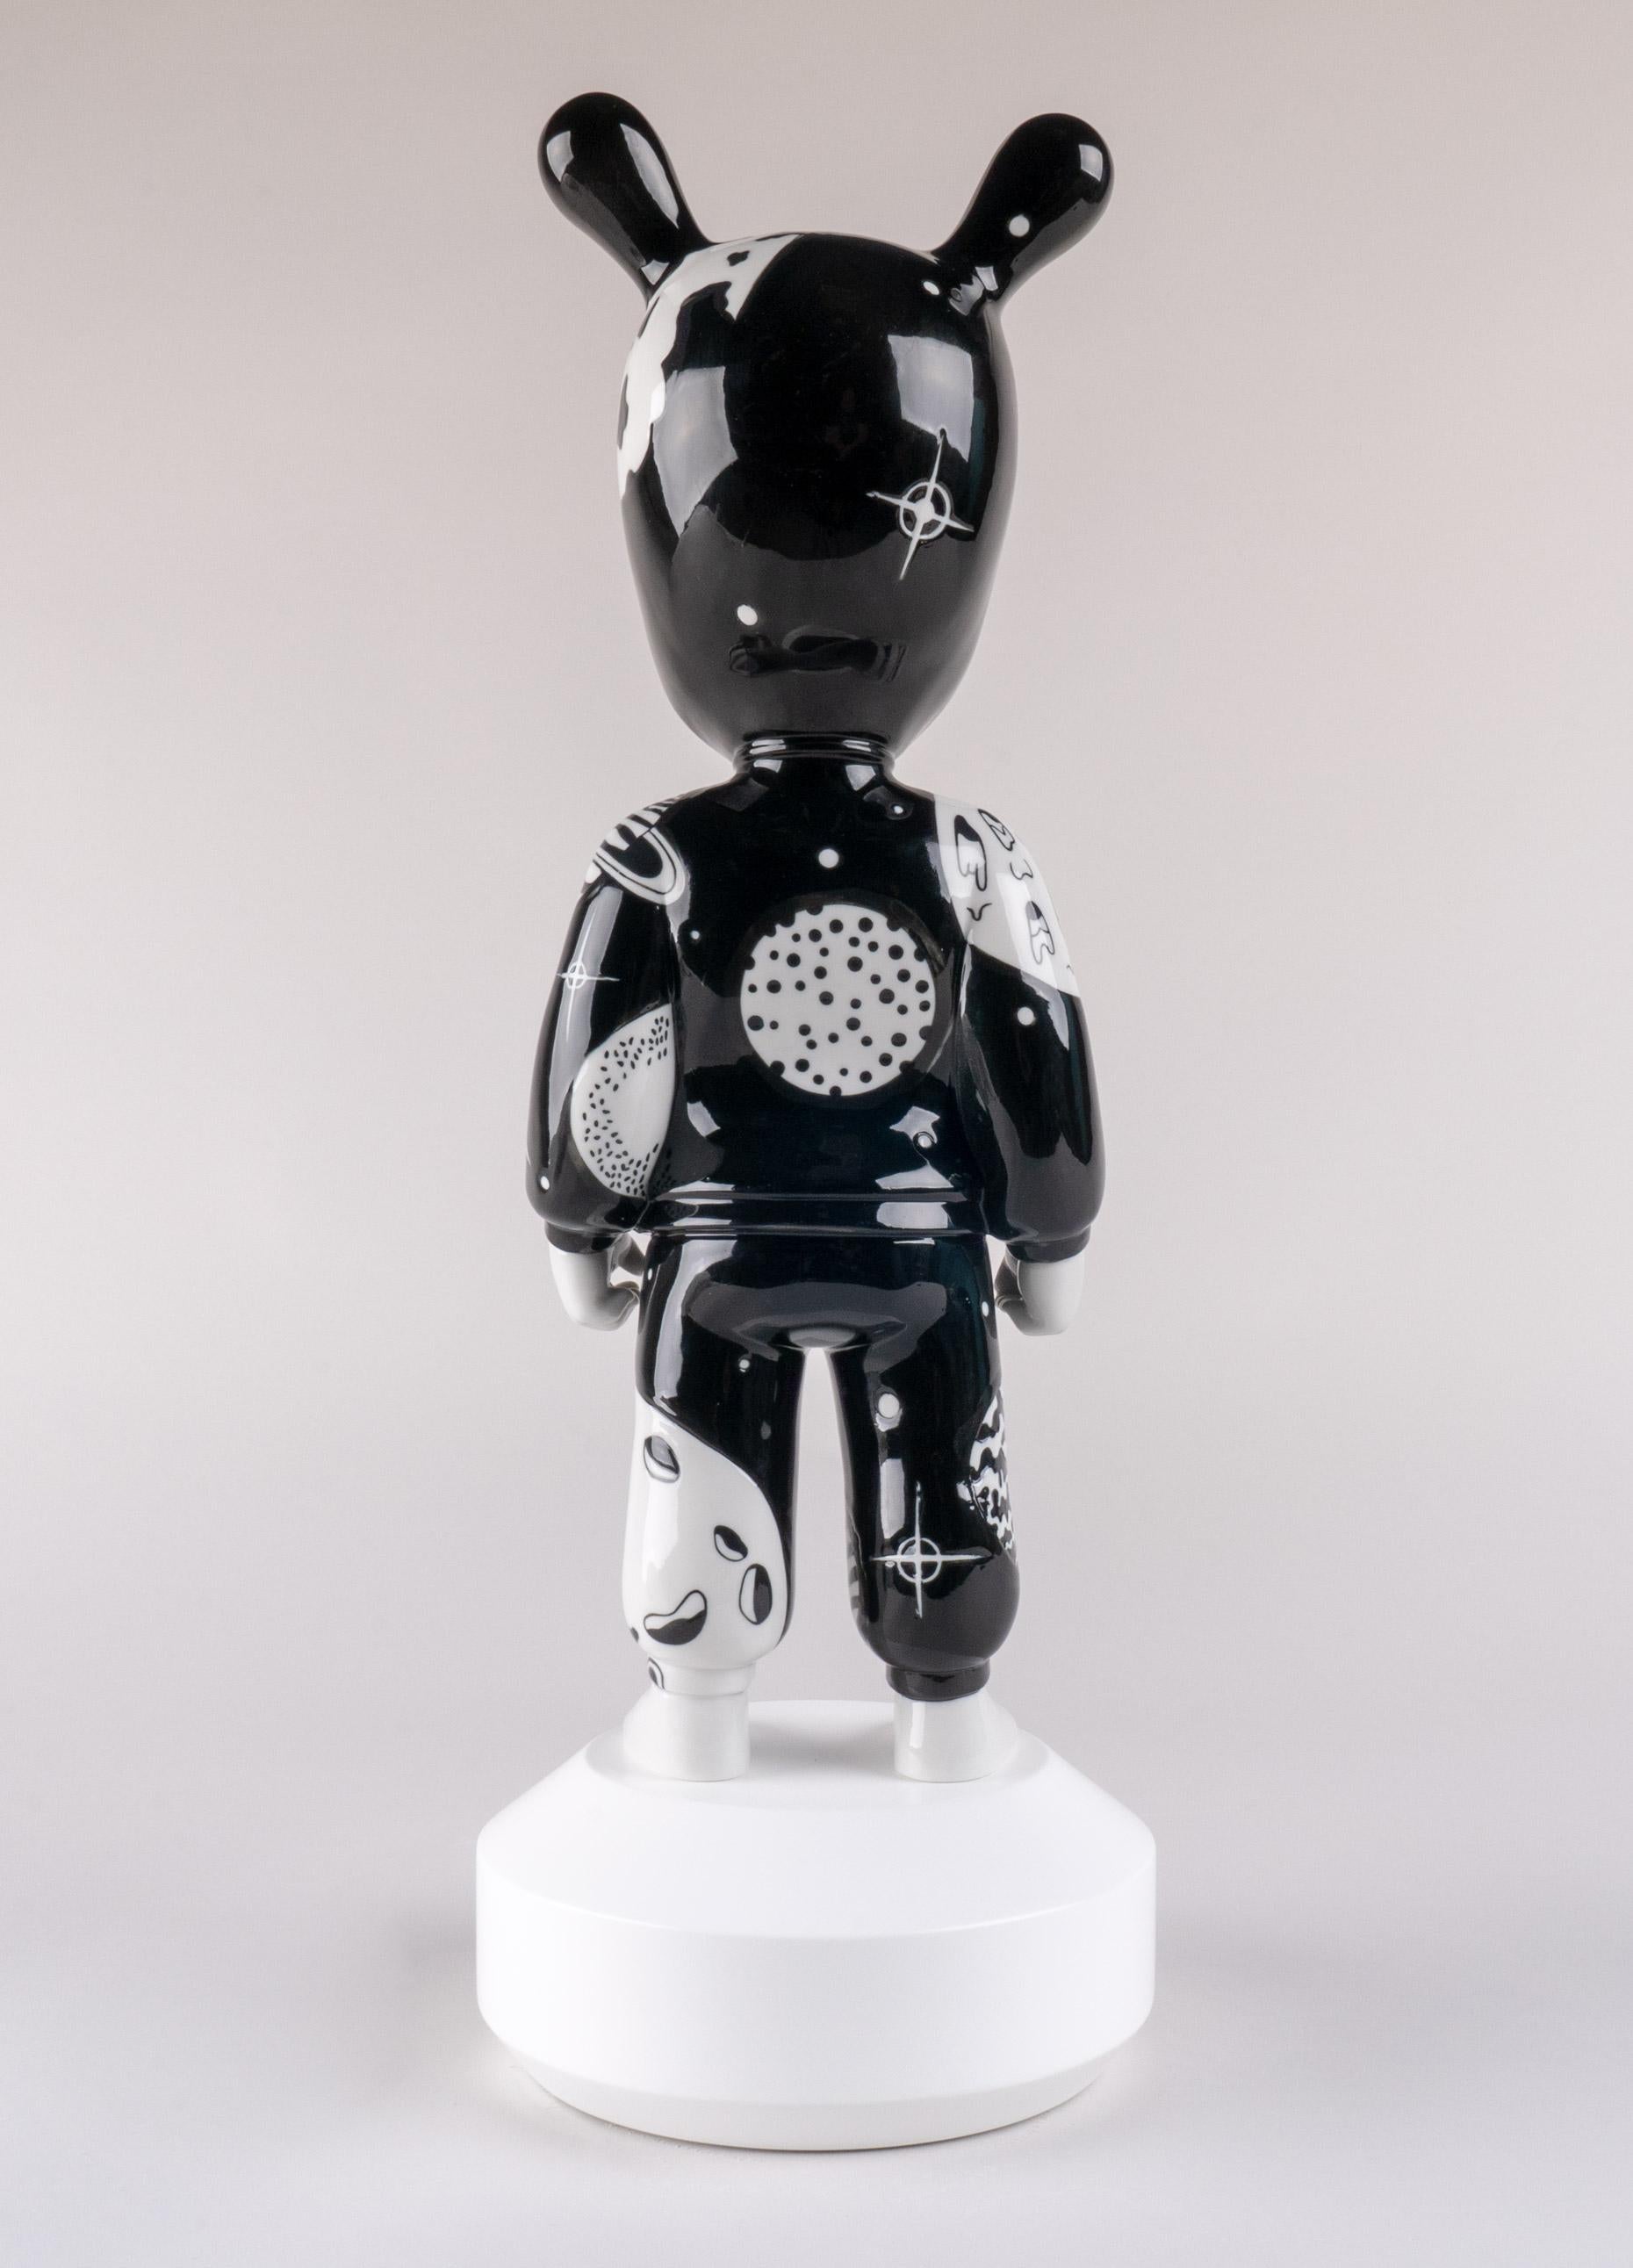 The porcelain figurine of this charismatic character, created by the celebrated designer Jaime Hayon, now arrives in a version by the Korean illustrator Henn Kim, an artist who submerges us in a personal world of visual metaphors and poetry, in